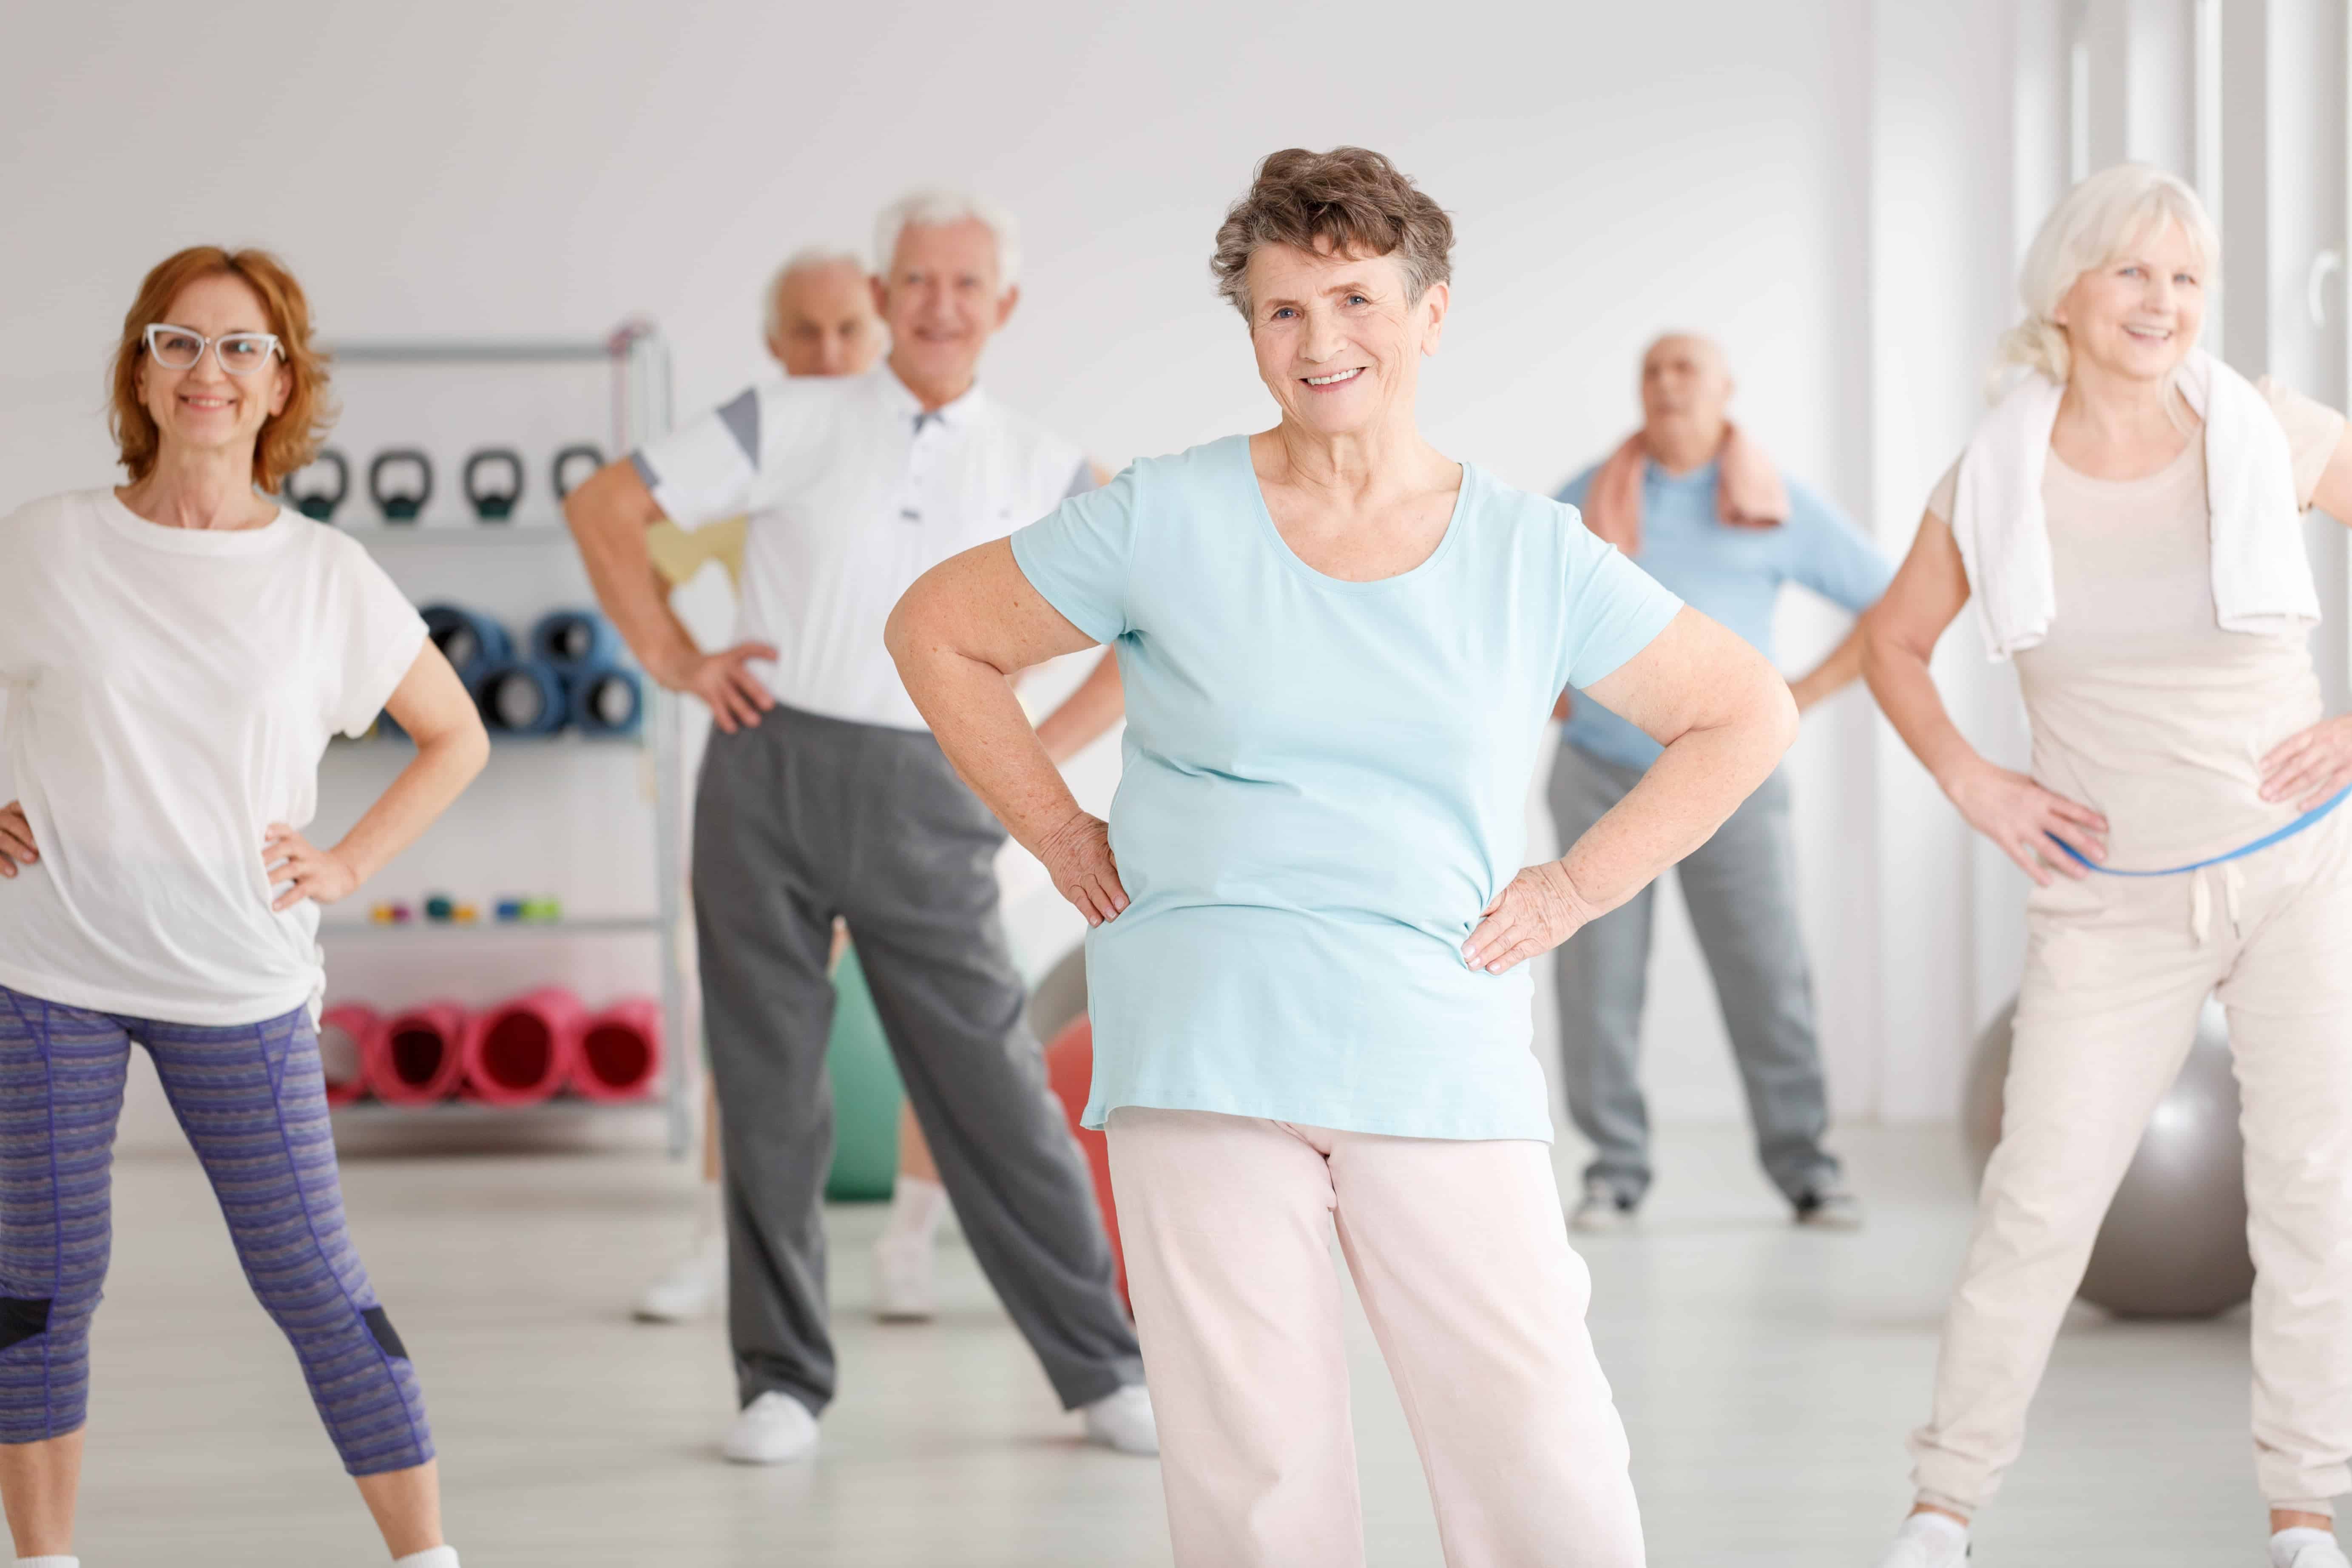 Smiling seniors in an exercise class